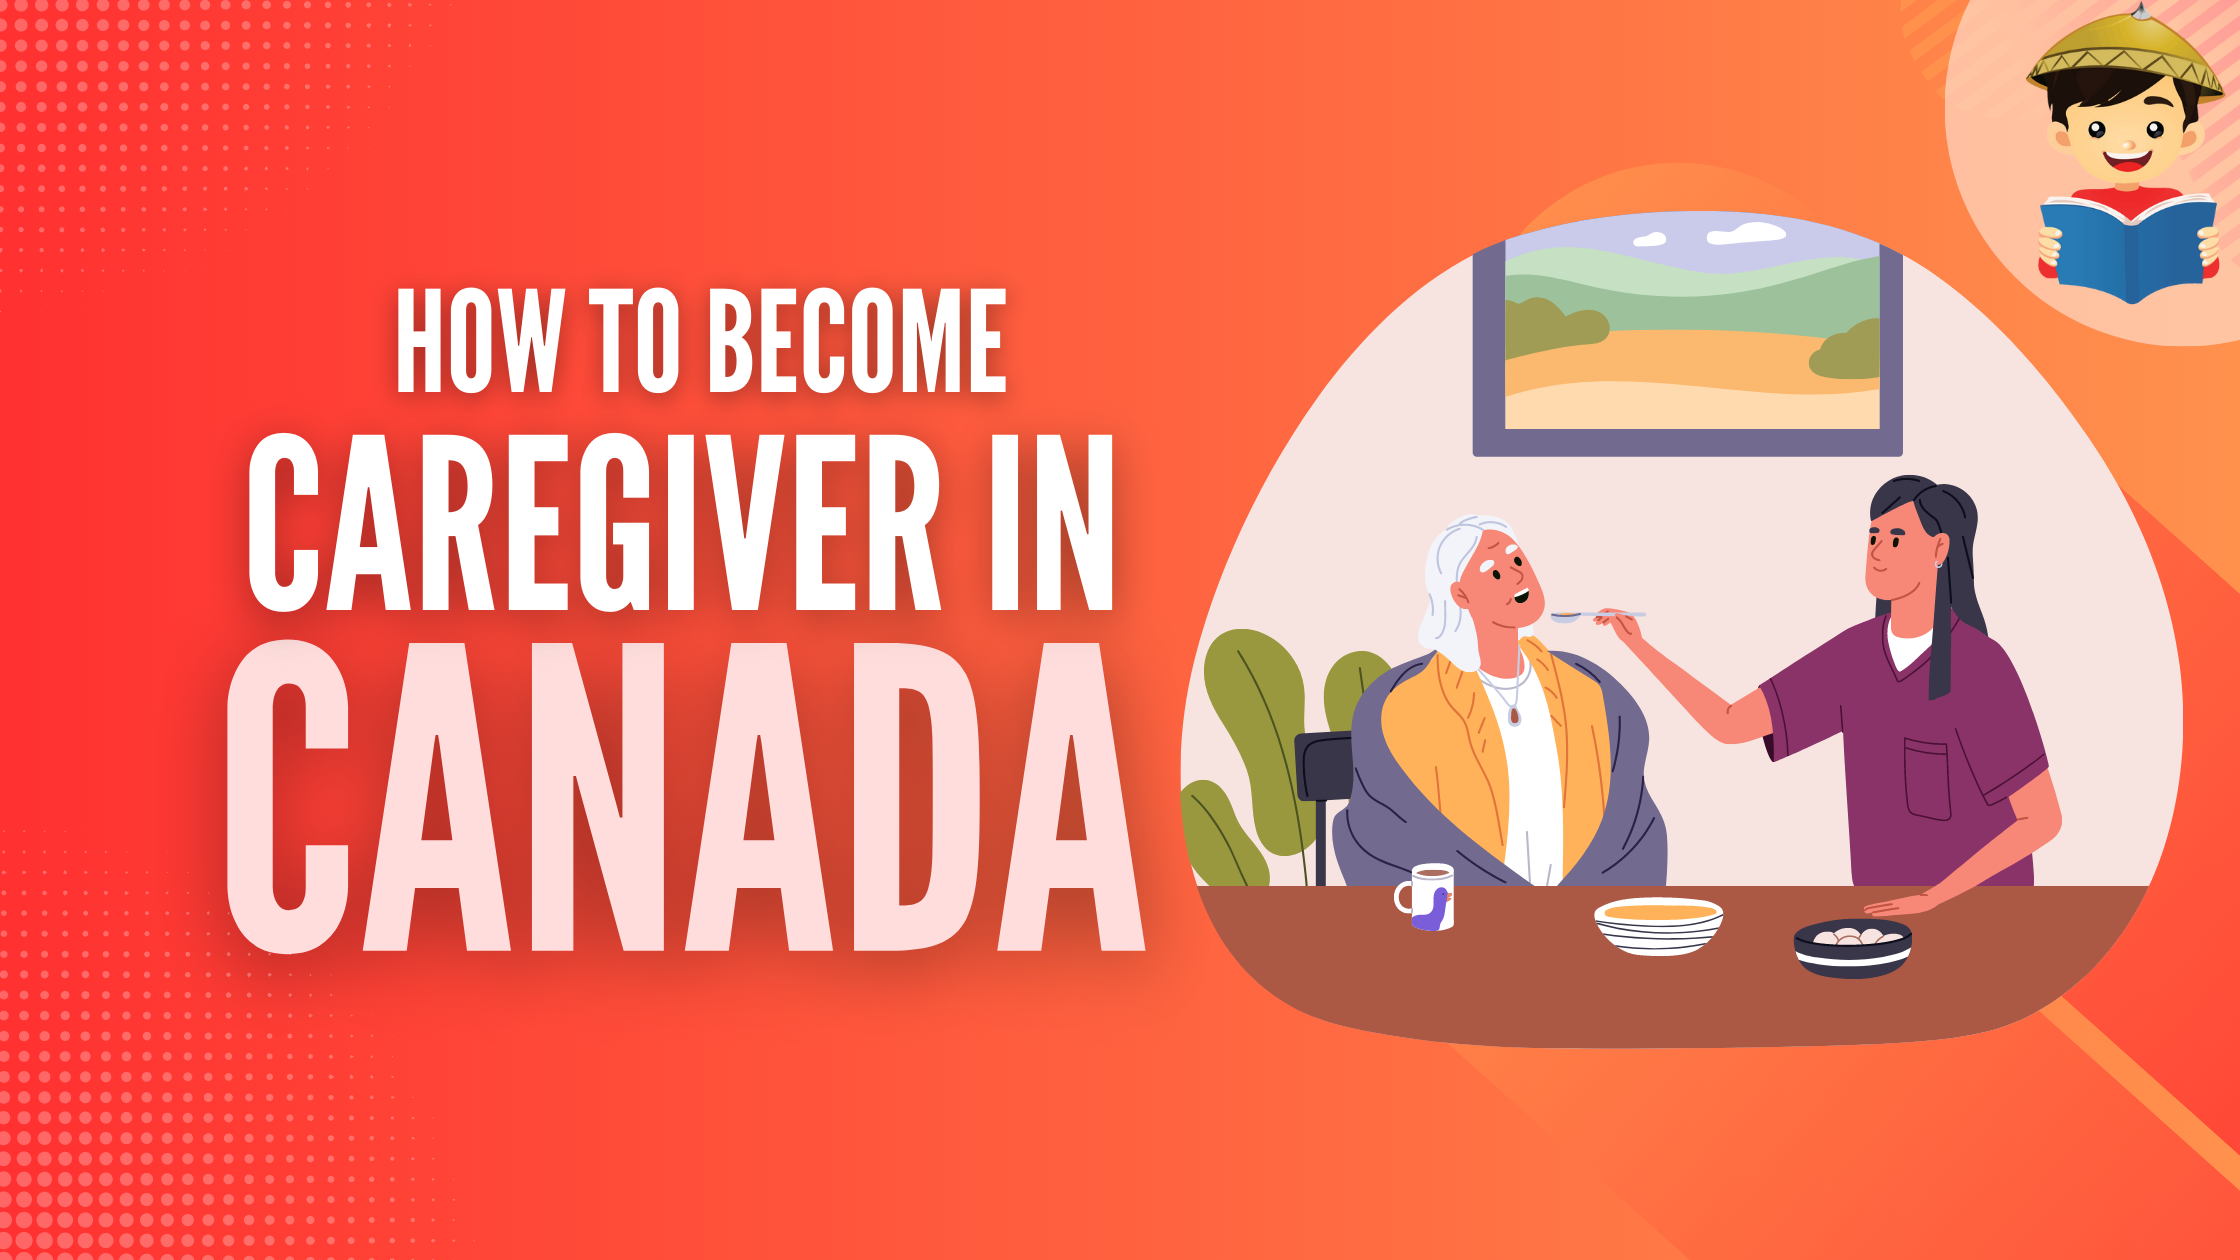 How To Apply as a Caregiver in Canada From the Philippines